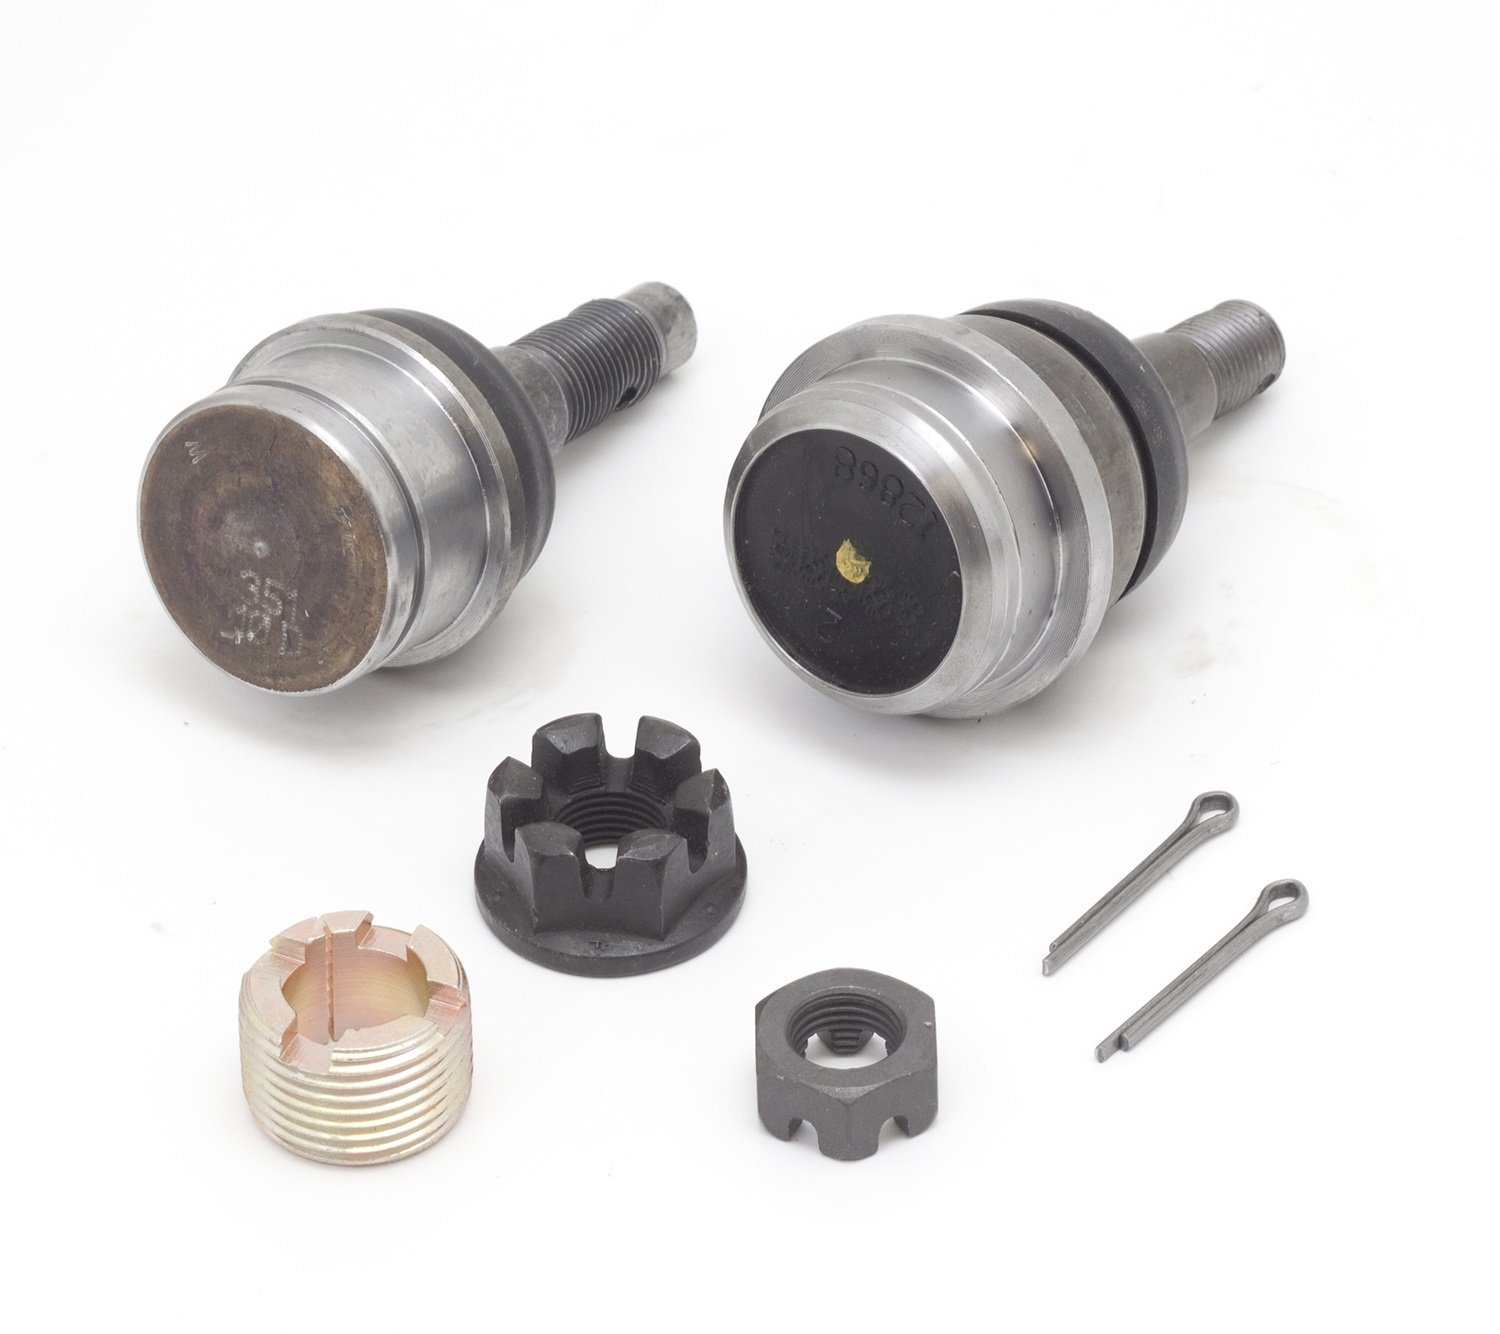 This Ball Joint kit from fits 07-16 Jeep Wrangler JK . It includes the upper and lower ball joints f